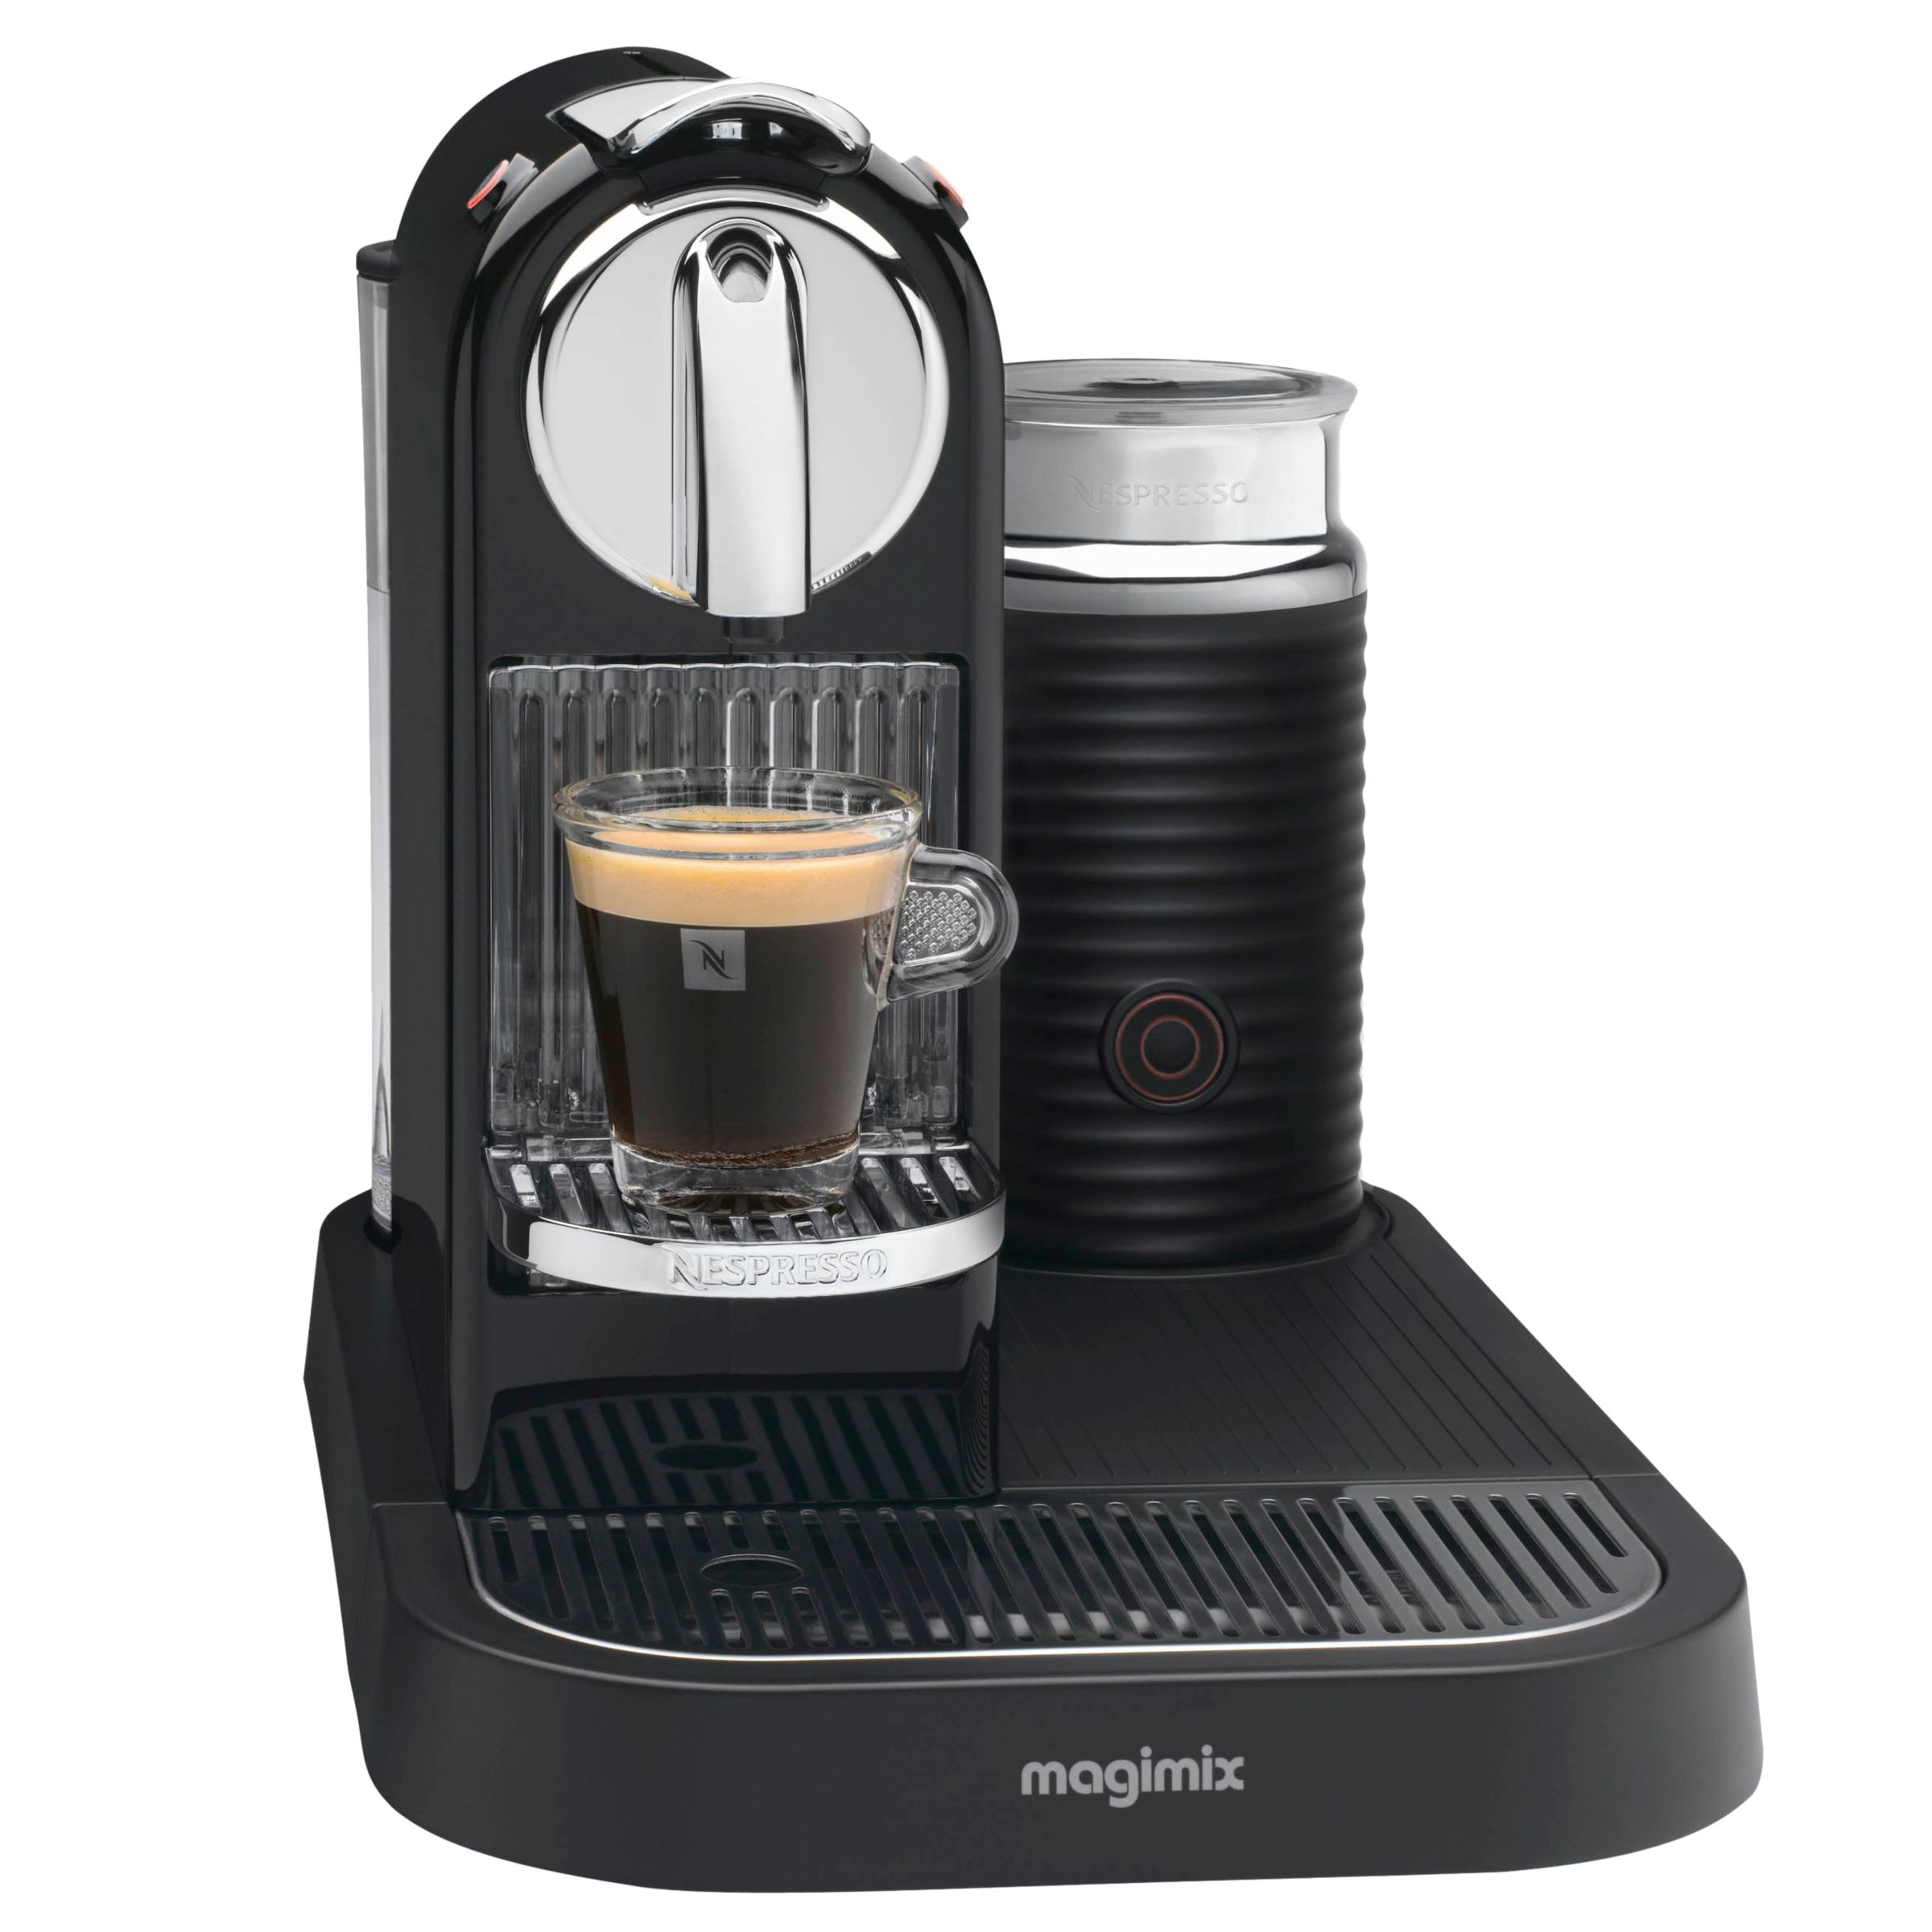 Nespresso M190 CitiZ and Milk Coffee Maker by Magimix, Black at JohnLewis